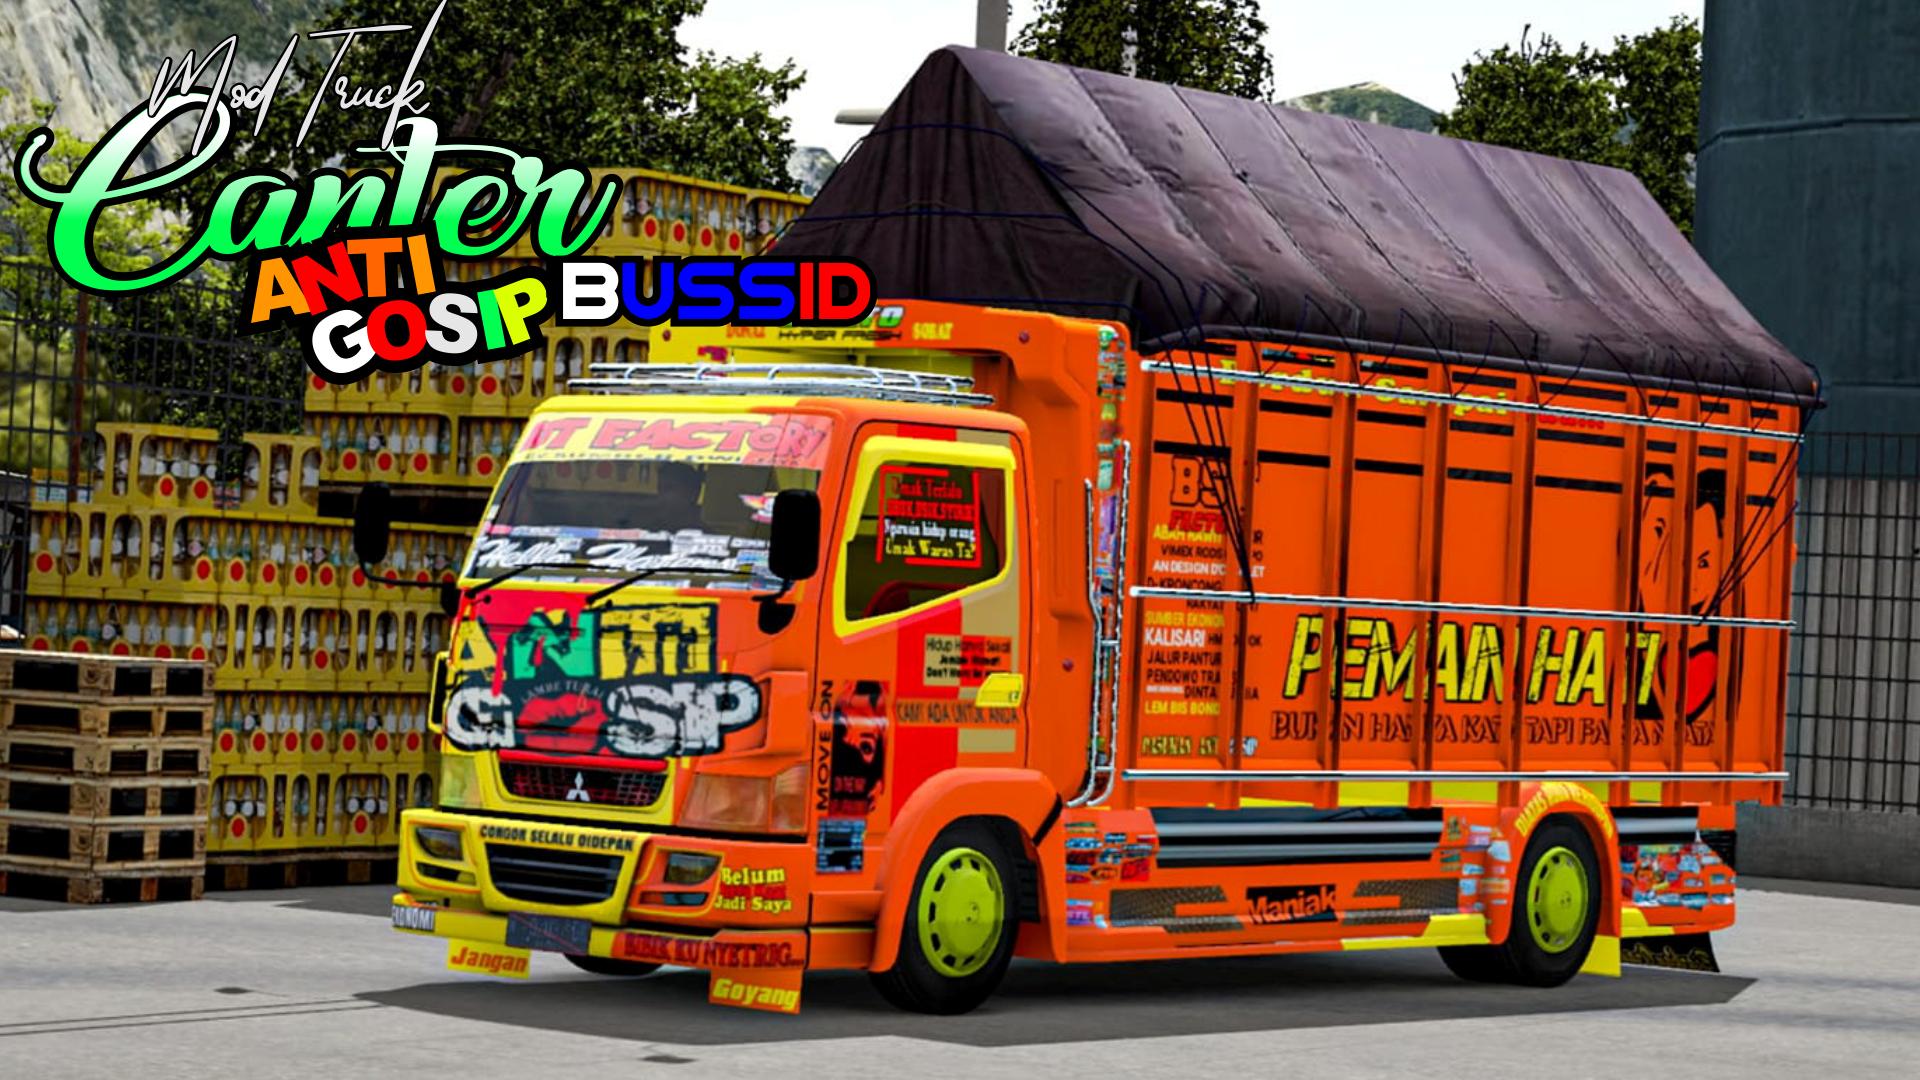 Mod Truck Canter Anti Gosip Bussid for Android - APK Download